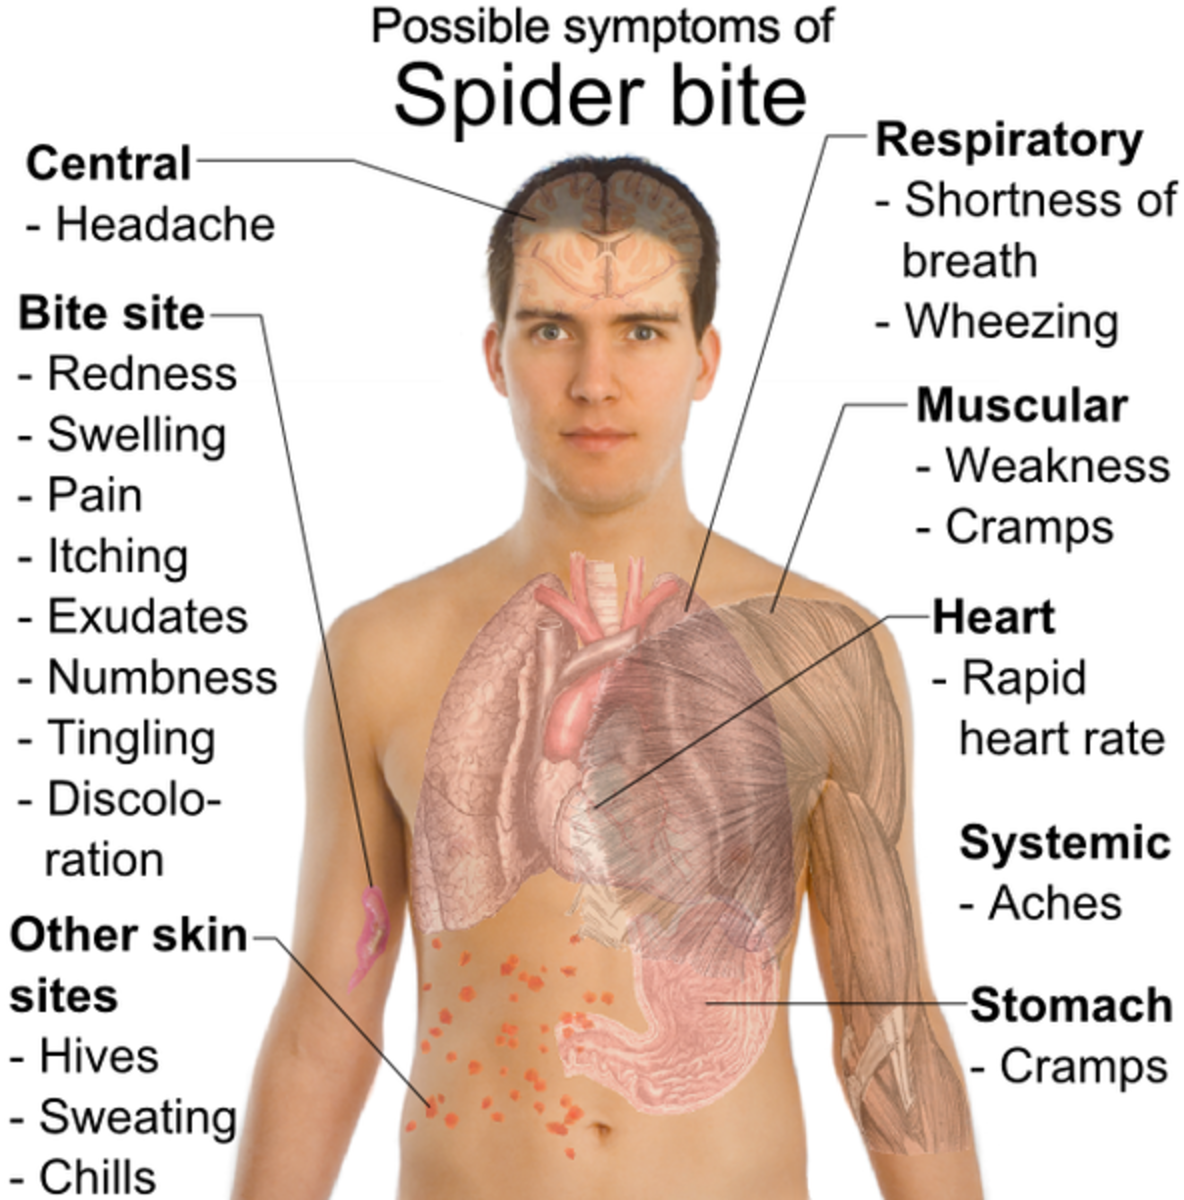 If you suspect you have been bitten by a Black Widow or another type of poisonous spider seek medical help as soon as possible.